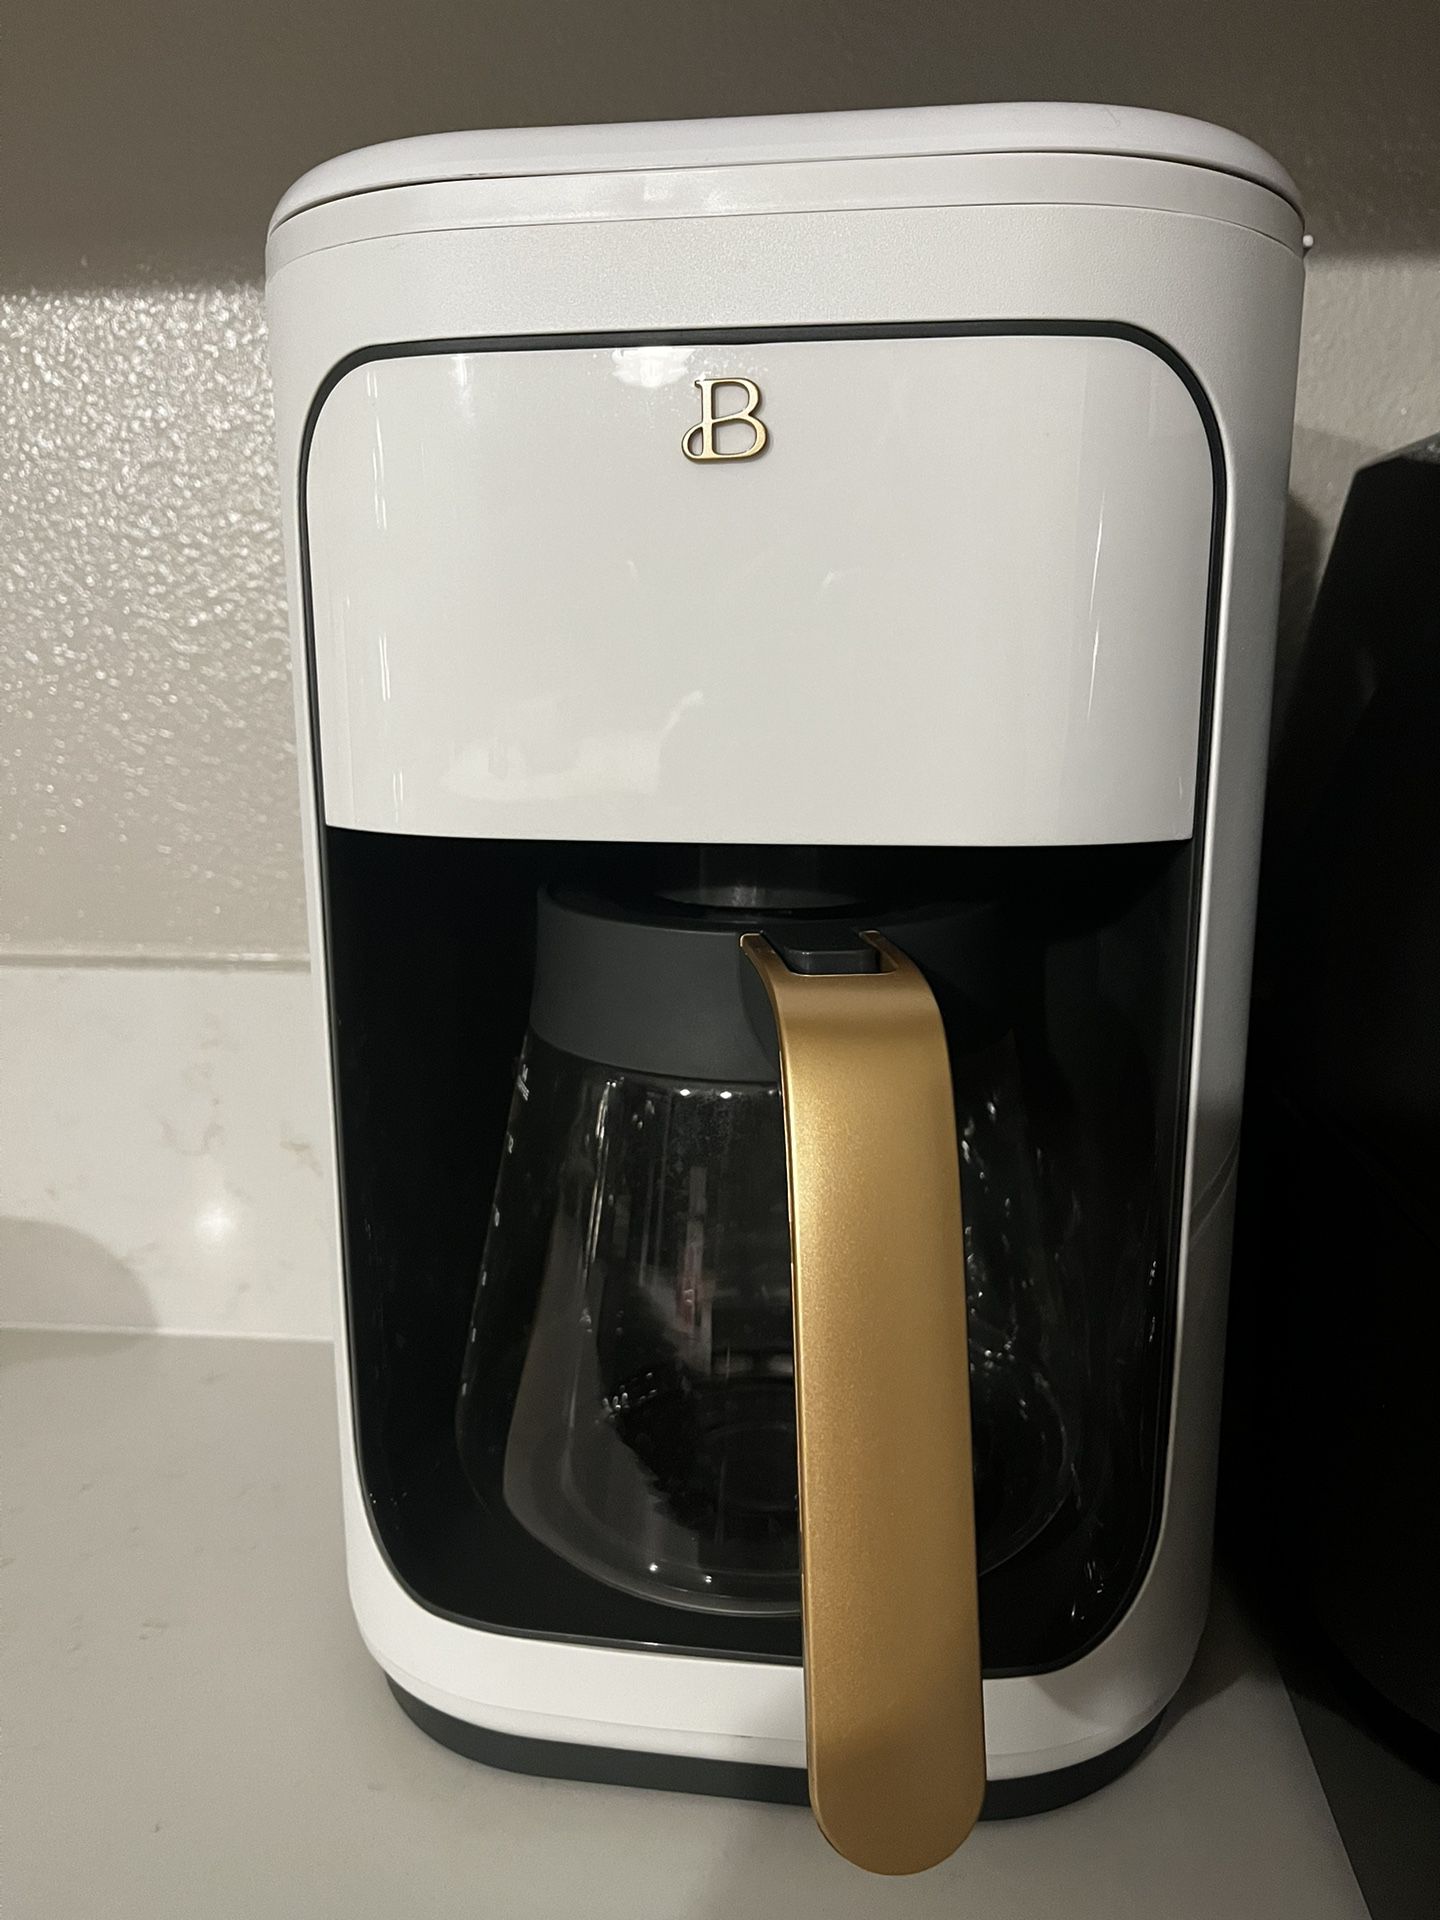 Ninja Specialty Coffee Maker with Fold-Away Frother and Glass Carafe New  open box $99.99 for Sale in Santa Ana, CA - OfferUp